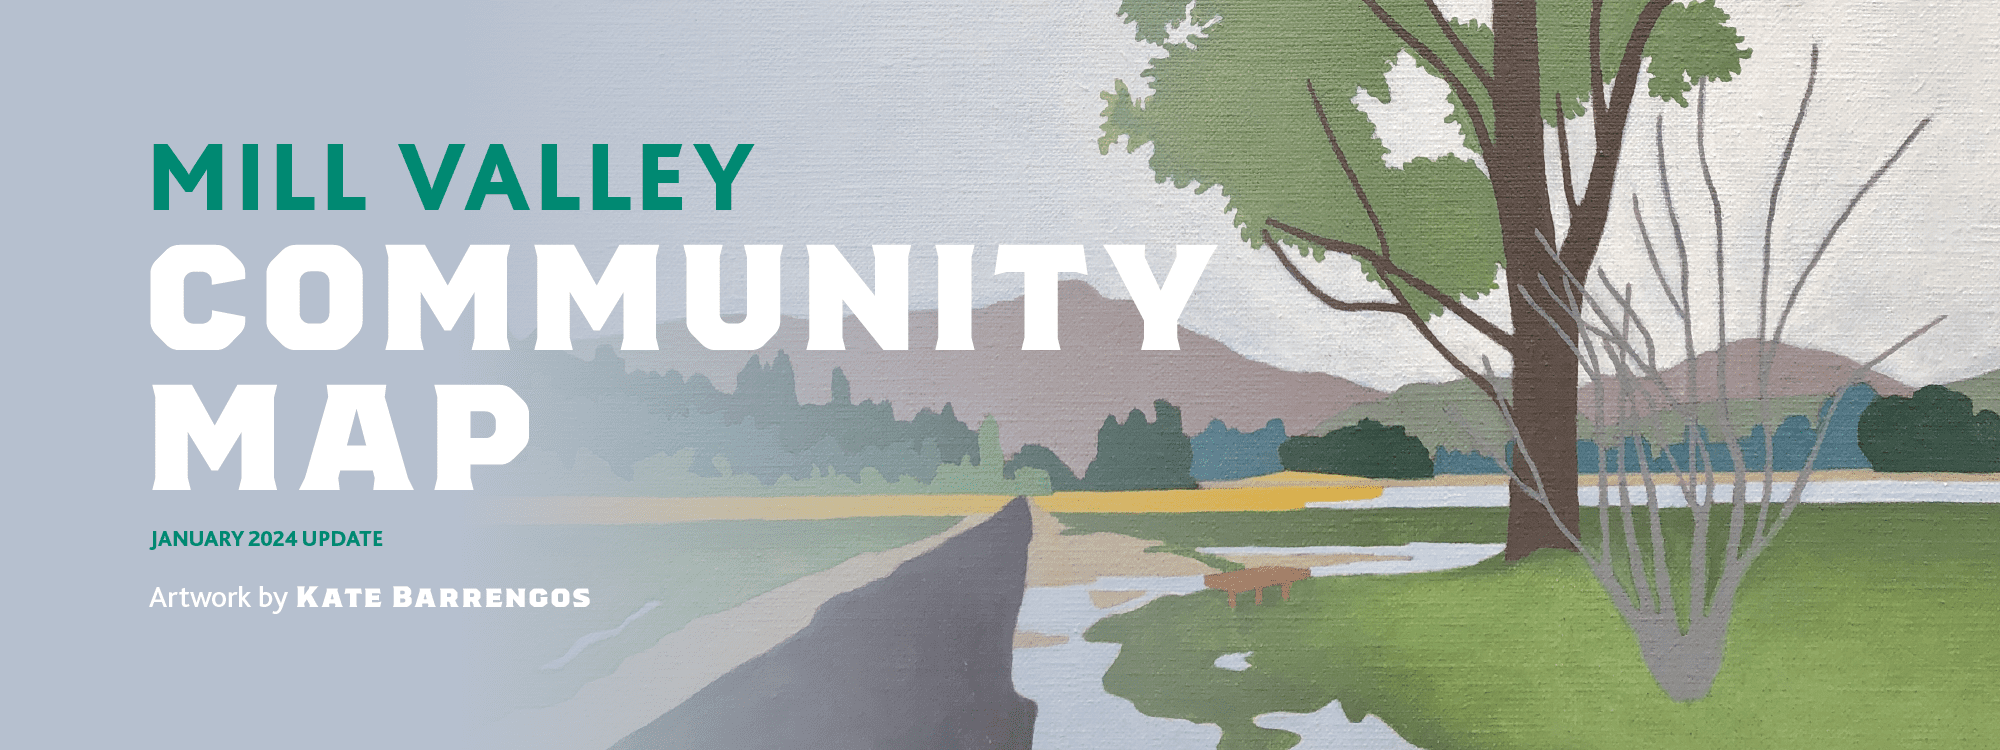 Mill Valley Community Map, April 2023 Update